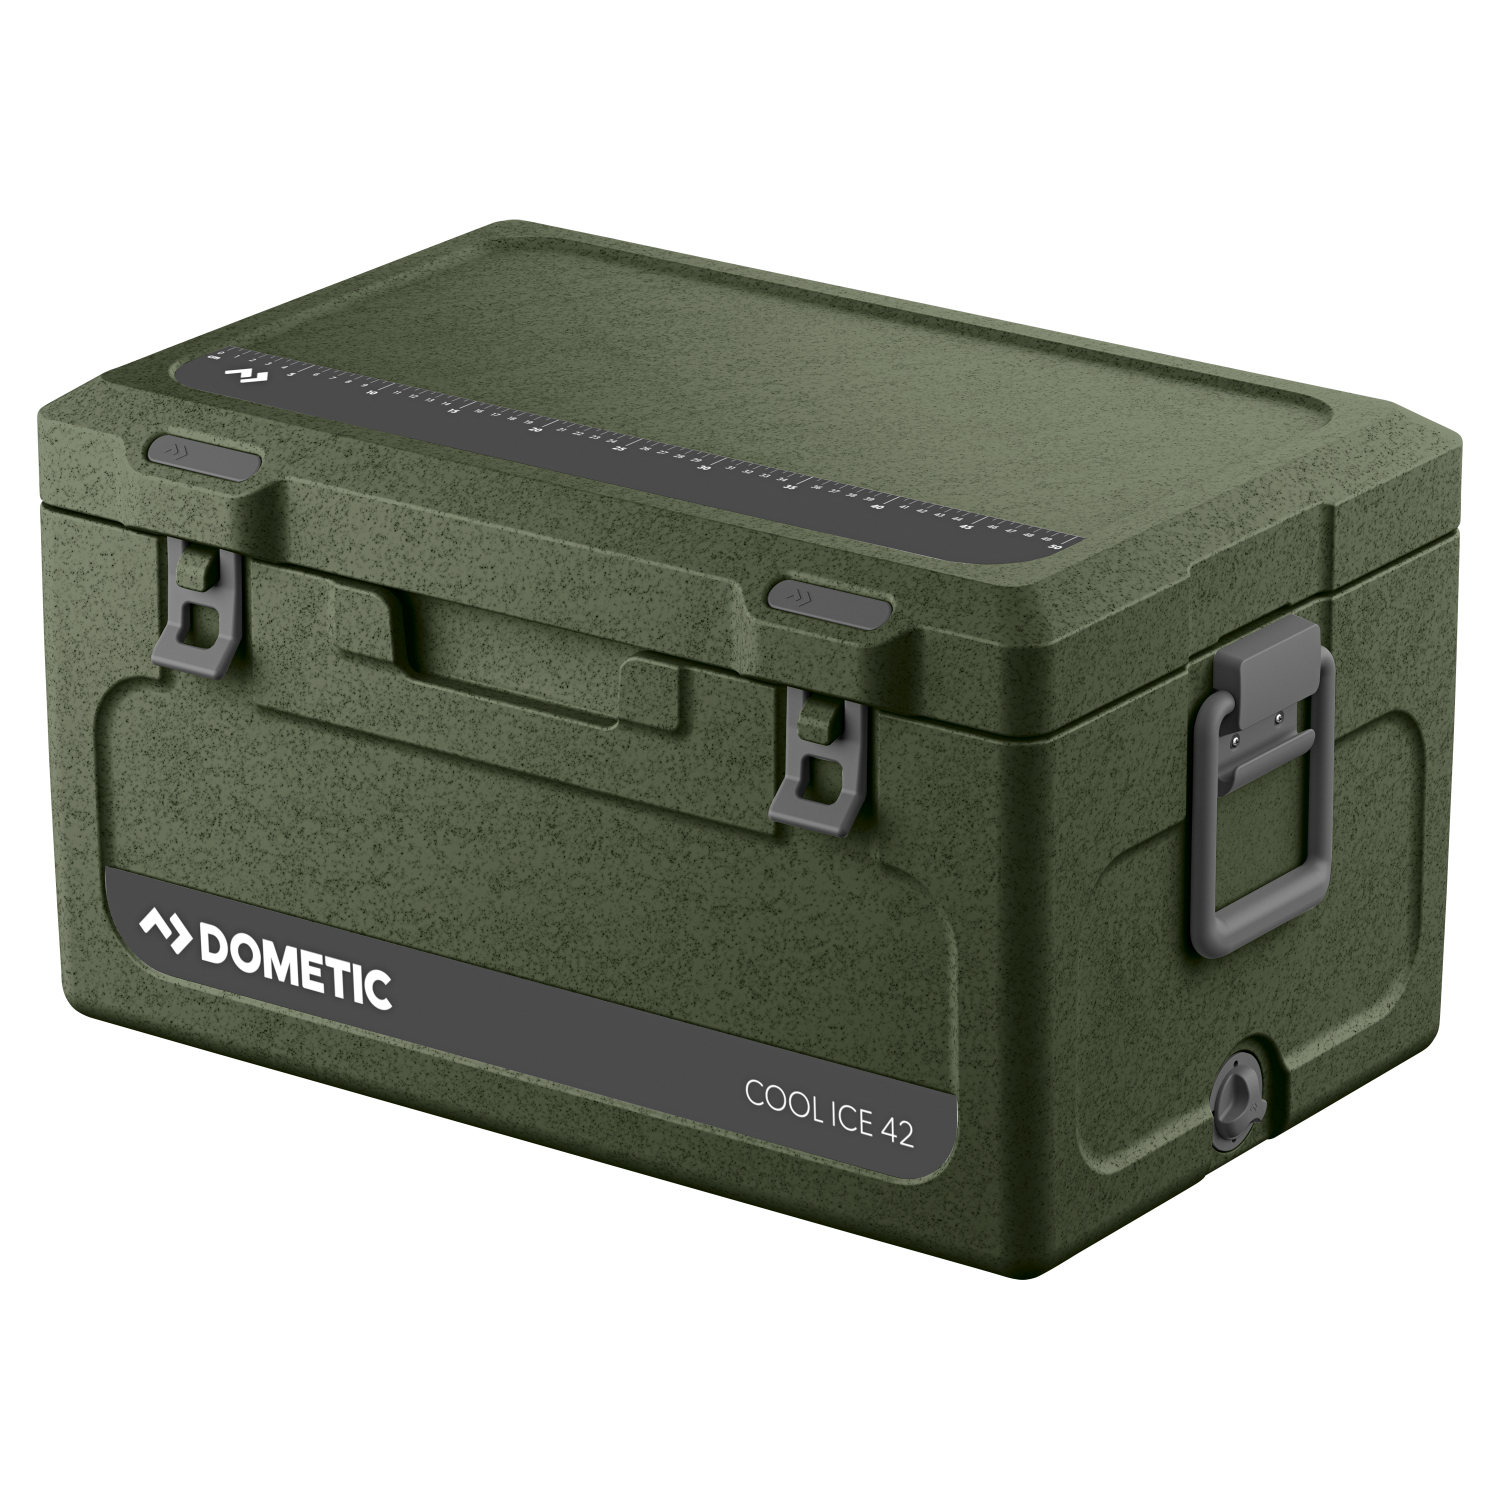 Dometic Cooler Cool Ice CI 42 